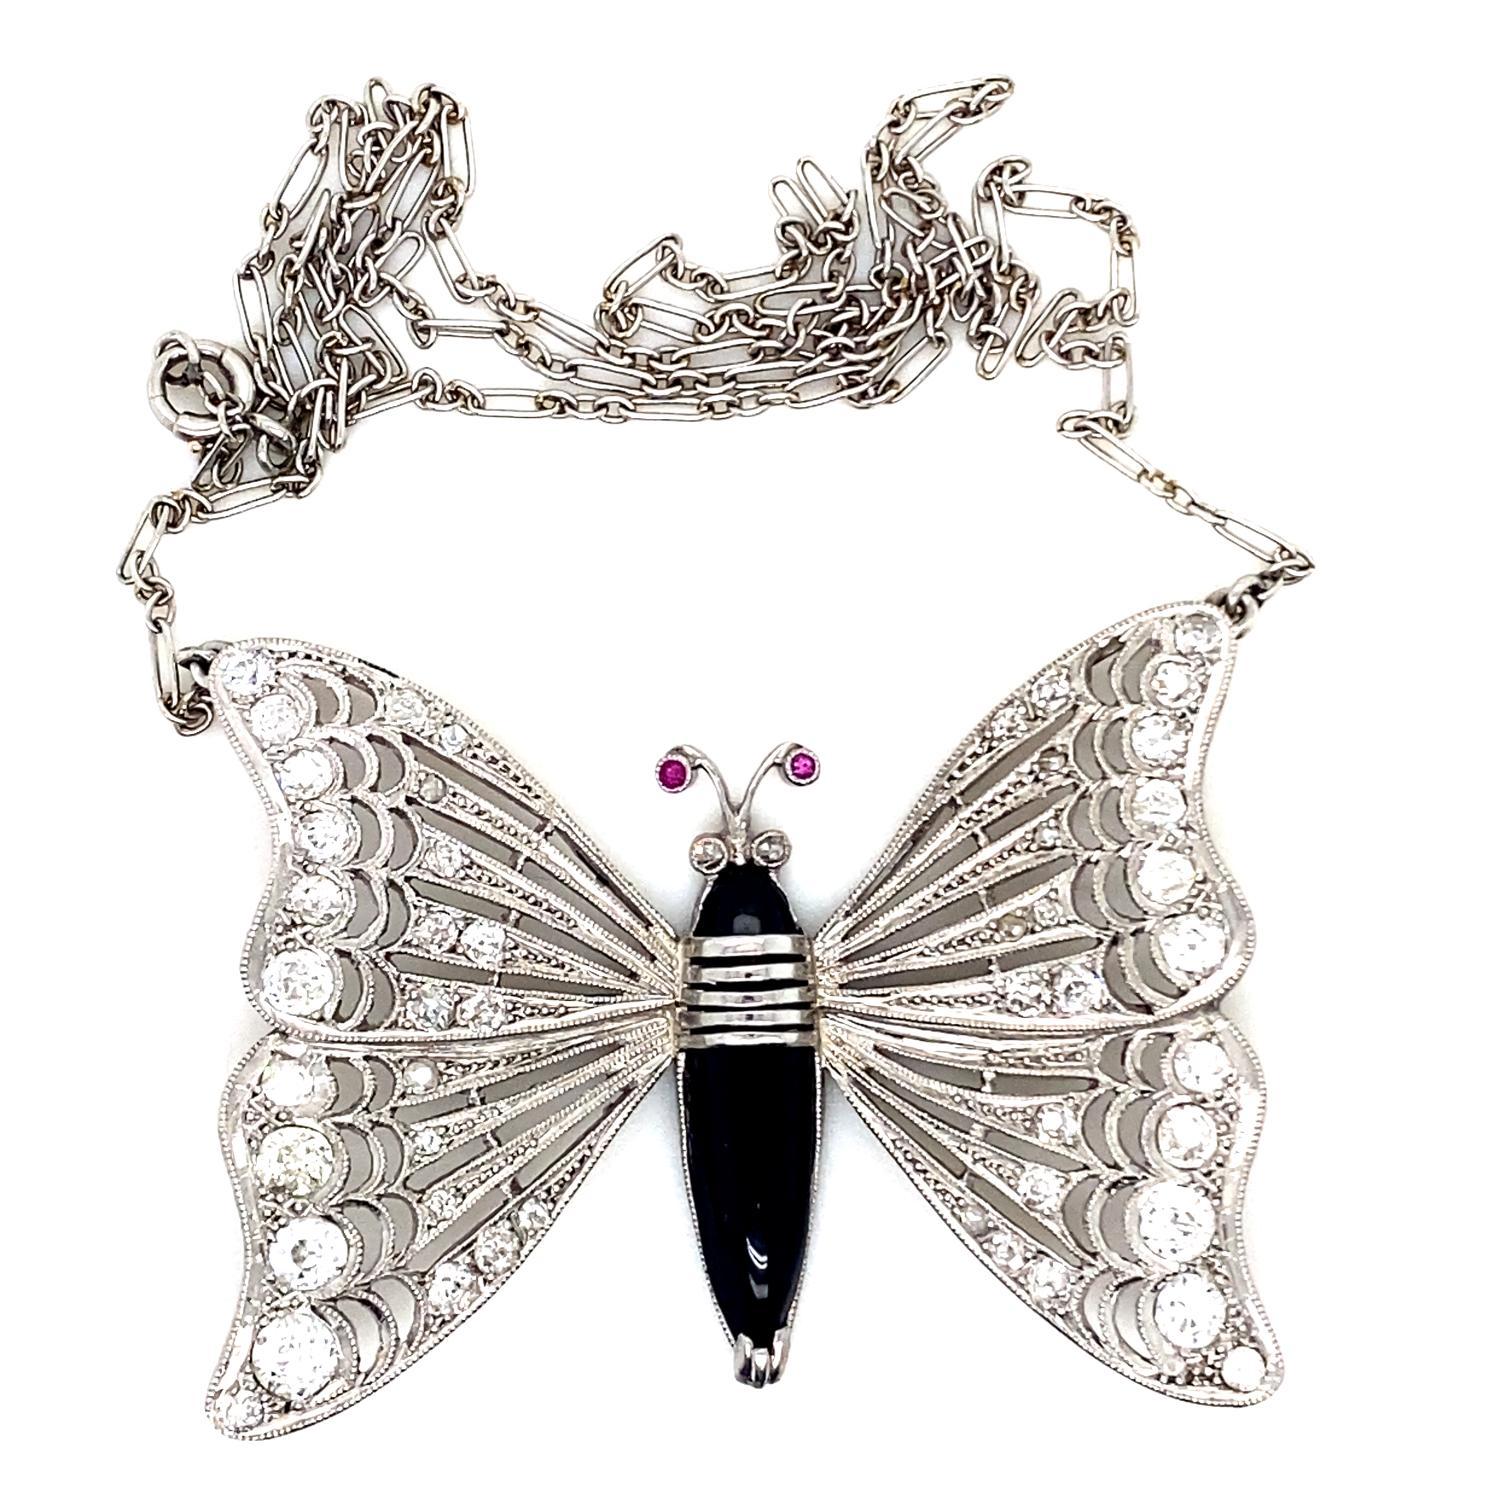 An onyx, diamond and ruby 18 karat white gold butterfly necklace

This fun necklace features two intricately crafted wings grain set in white gold with old cut diamonds of 1.50cts approximately, assessed as H colour, VS2 -SI2 clarity. These are set